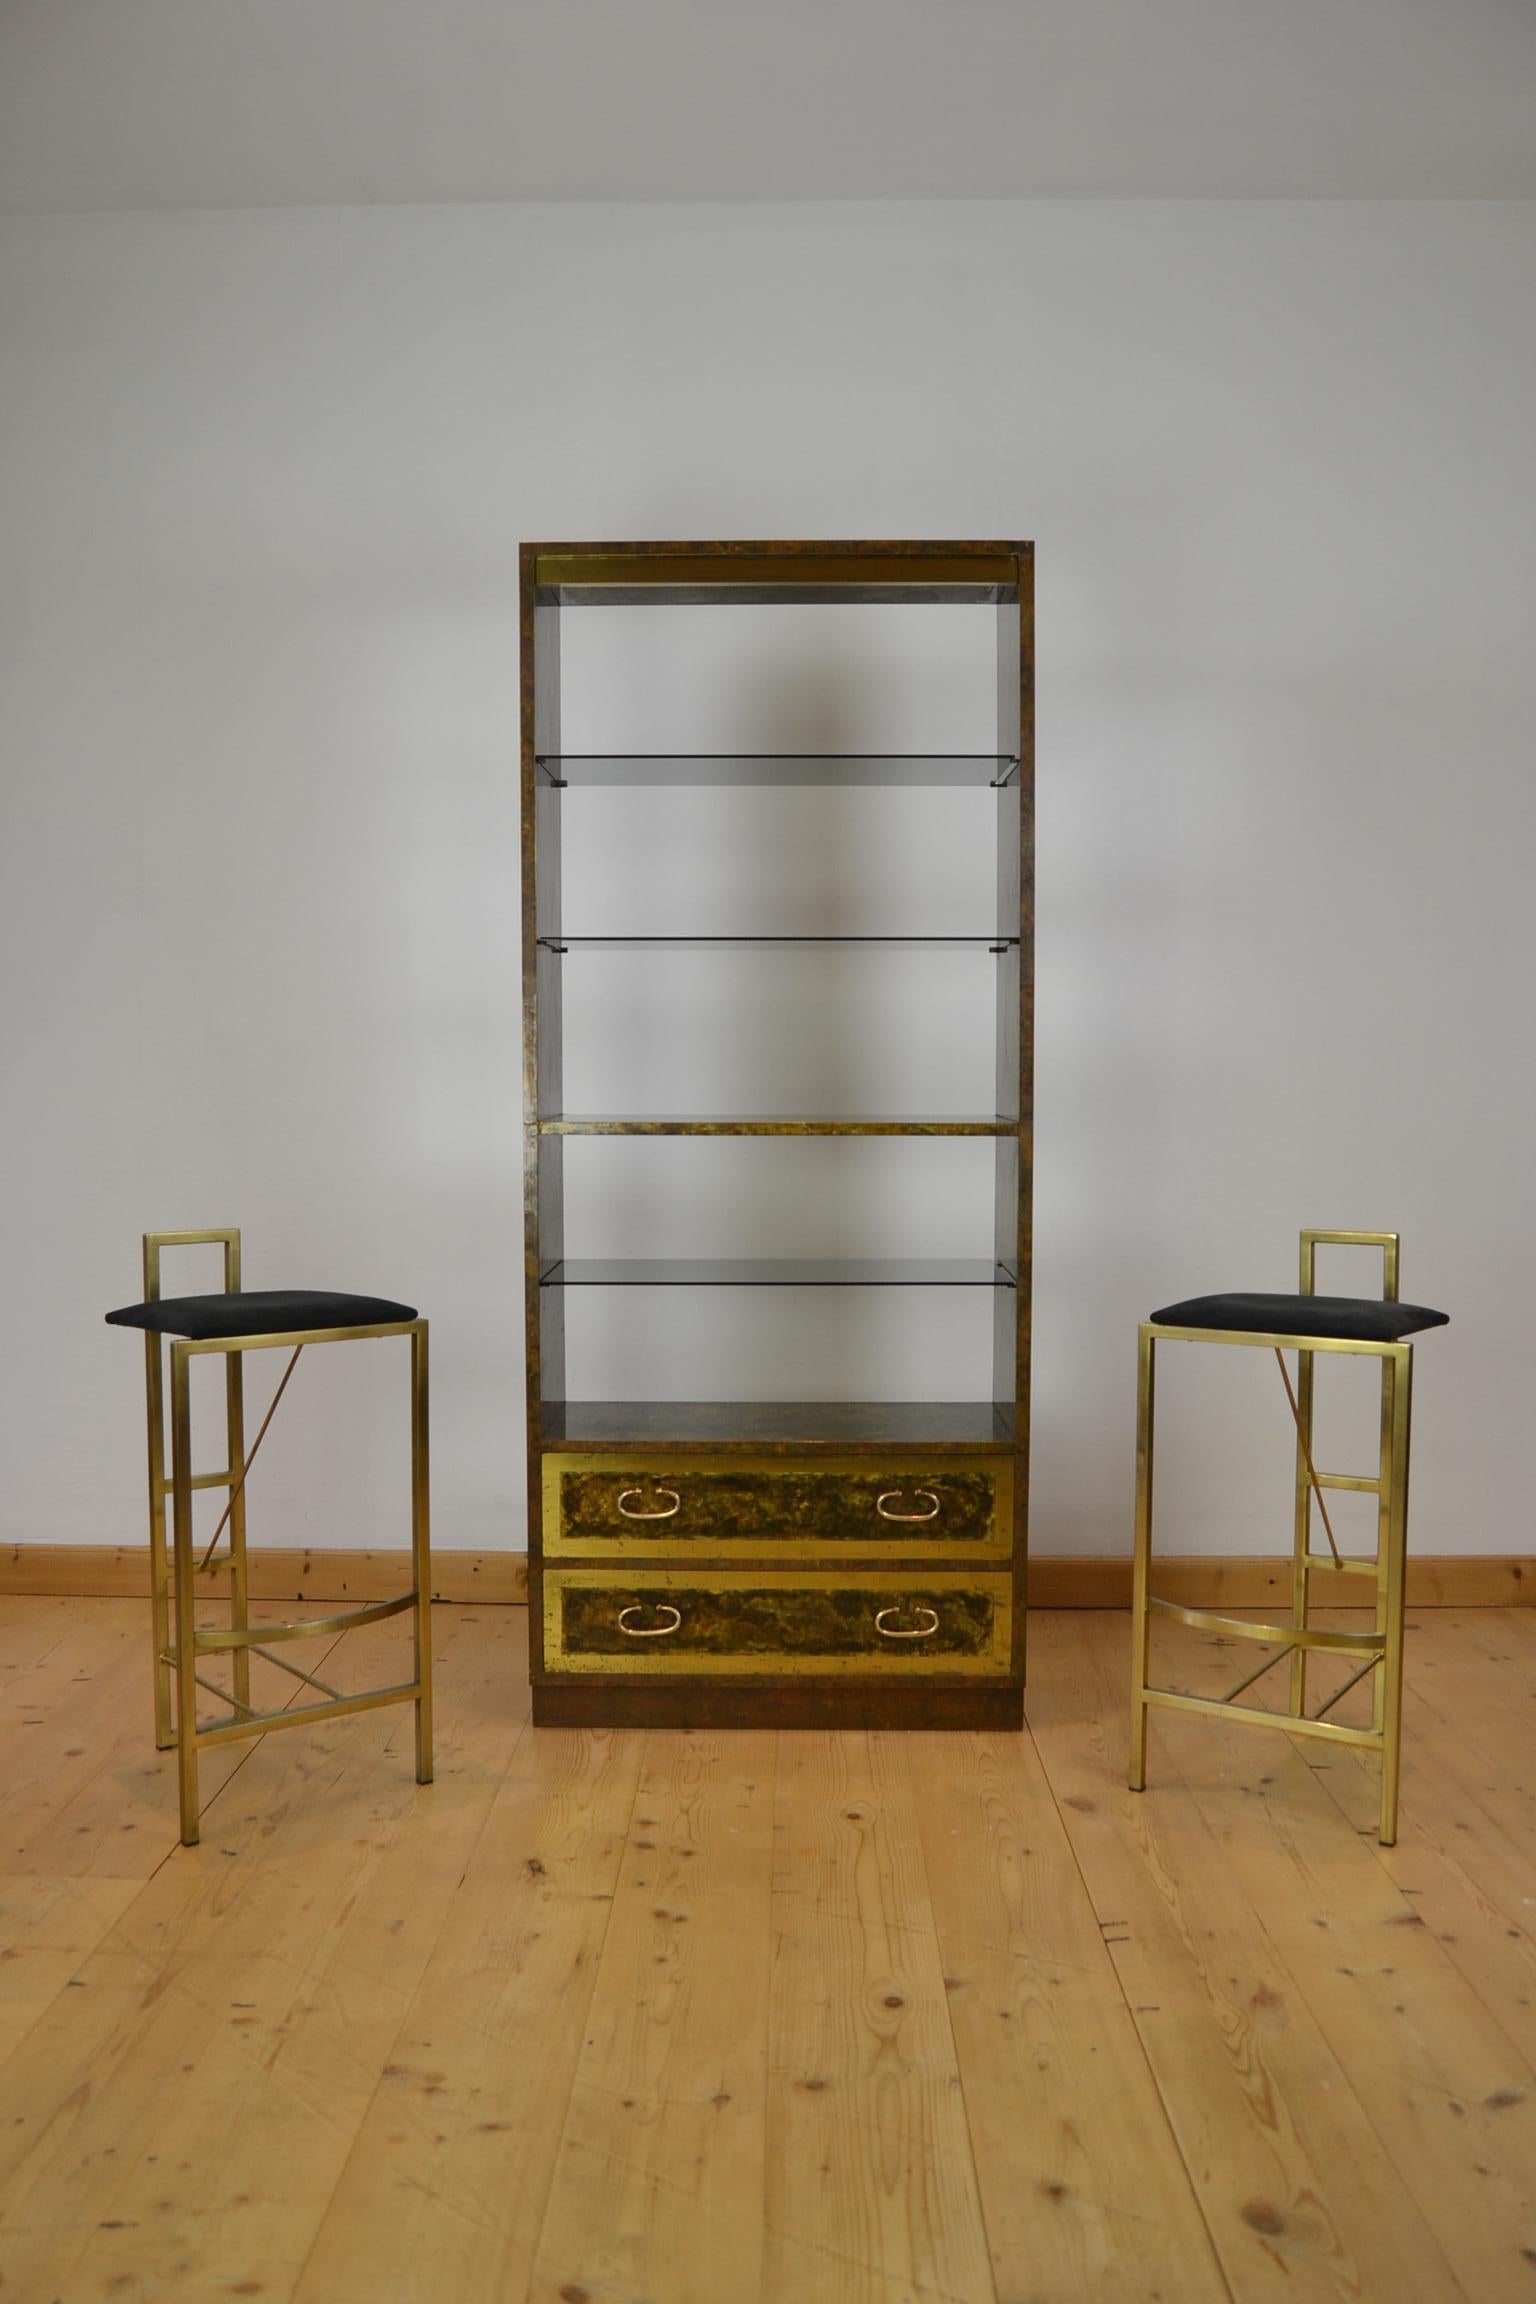 1970s shelves, etagère, bookcase, showcase, room divider 
with smoked glass shelves and 2 drawers with handles.

An open cabinet finished all around the 4 sides with yellow and red copper, 
so does not need to stand against a wall. 
Hollywood